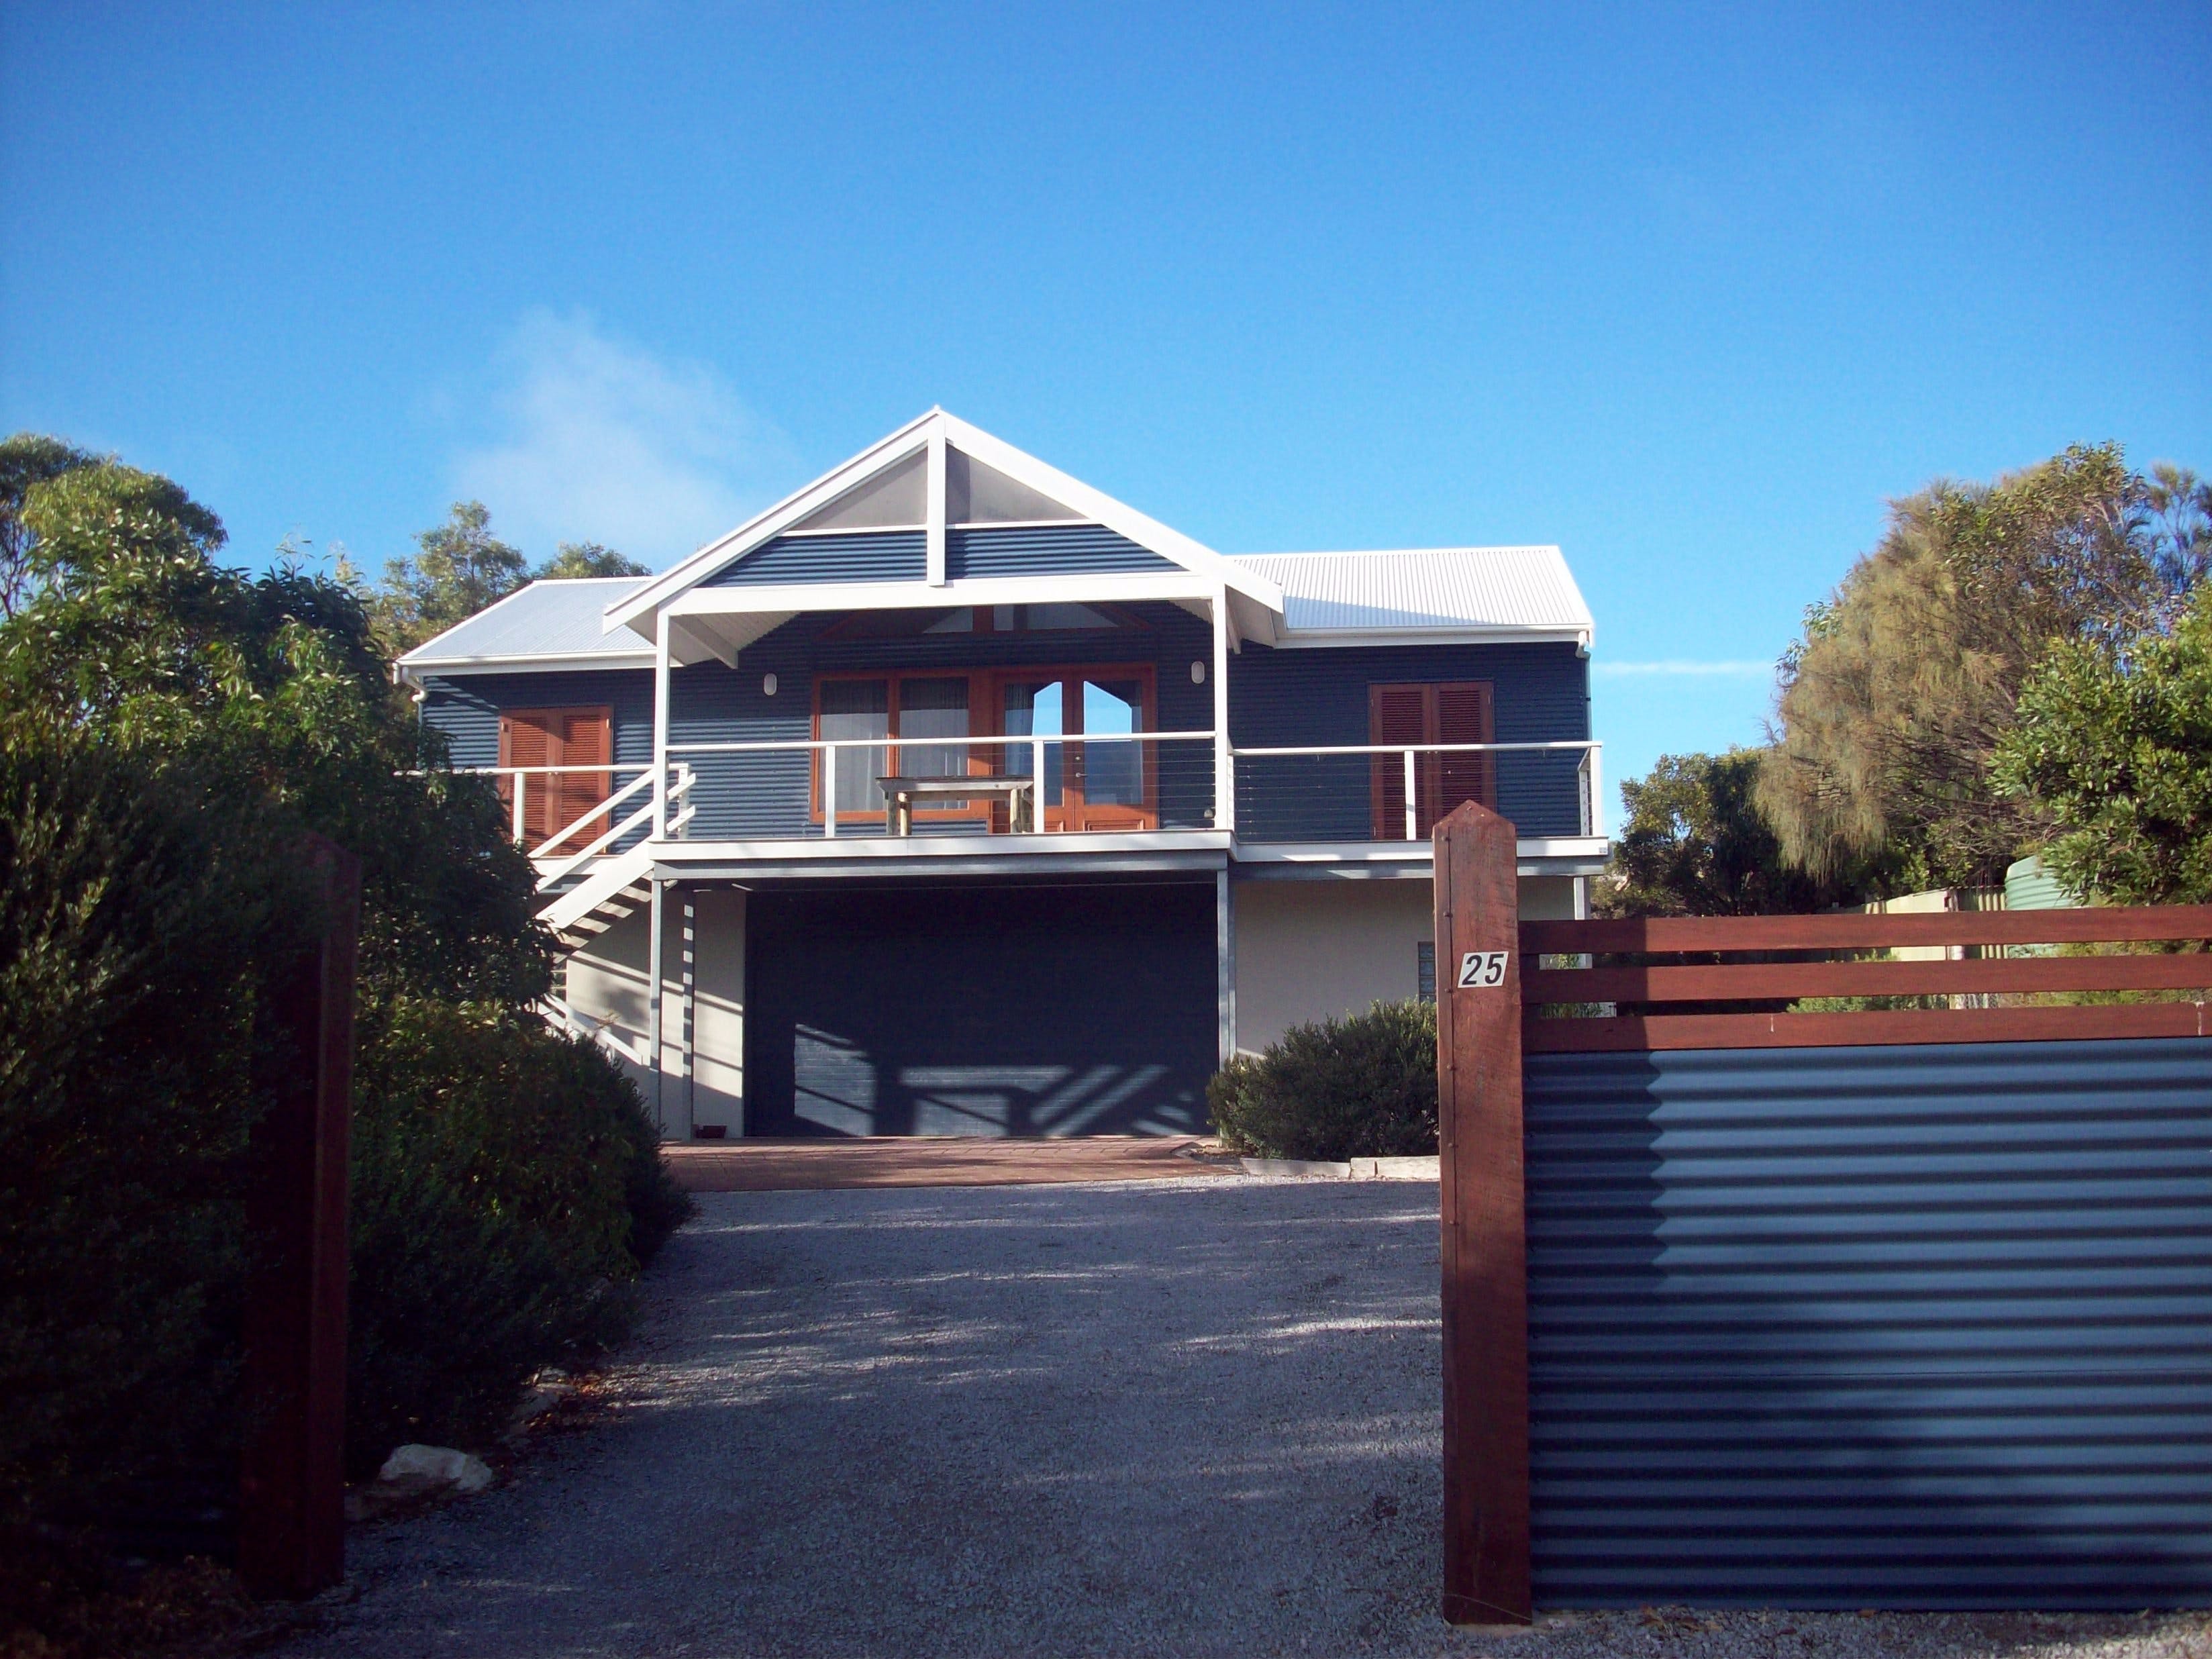 Top Deck Marion Bay - Port Augusta Accommodation